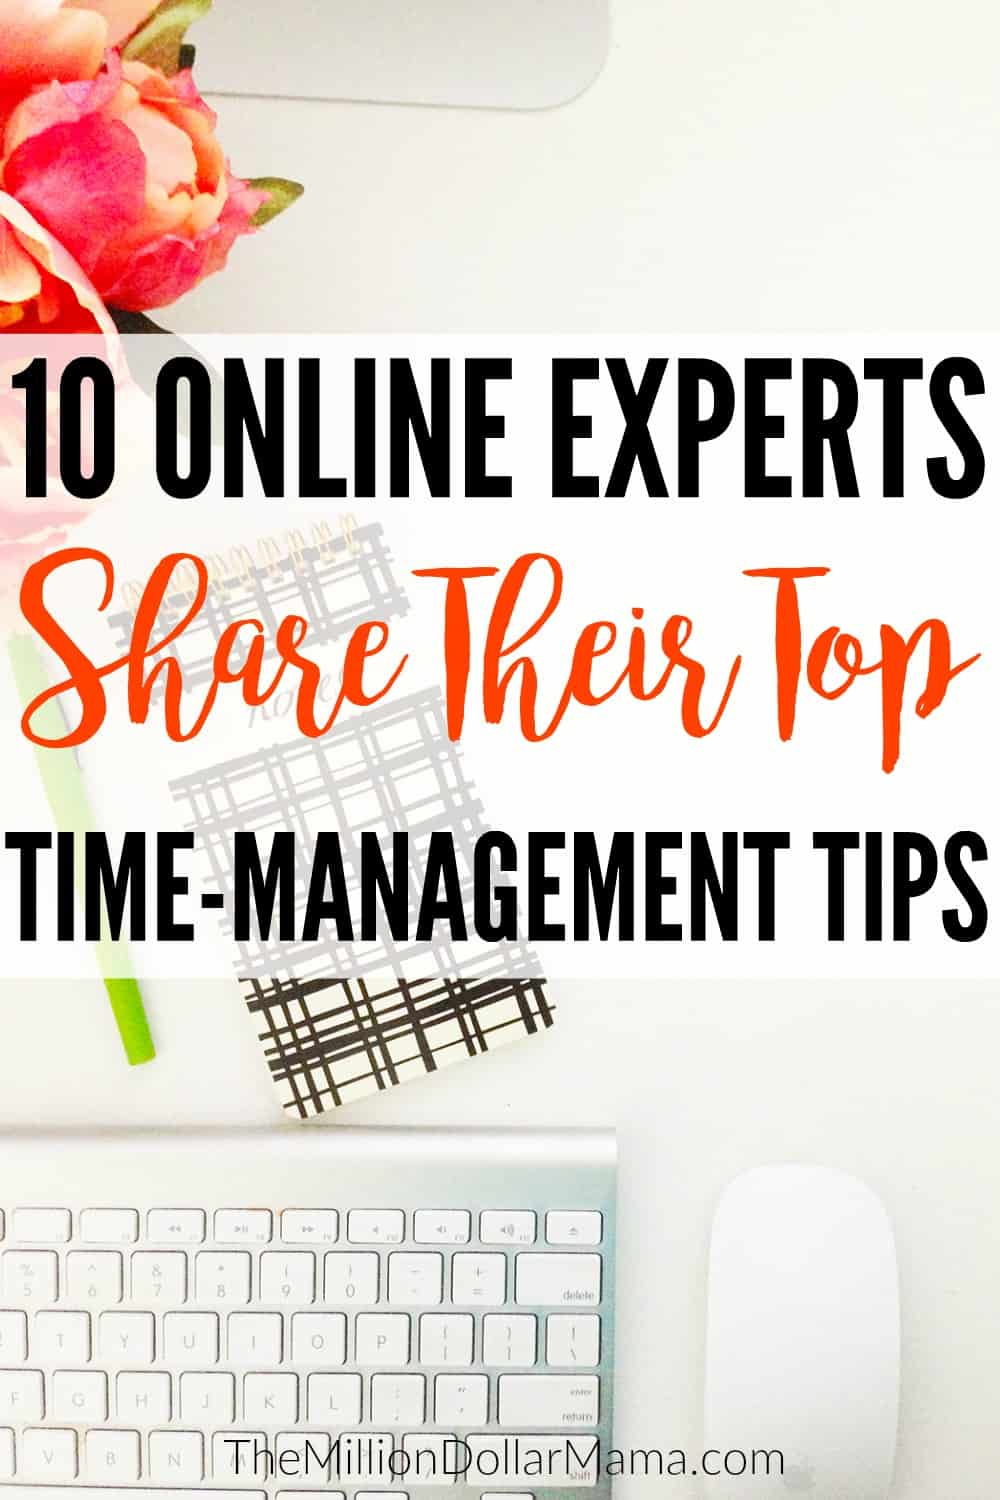 Time-Management tips from expert entrepreneurs! These 10 experts share their top tips on how to manage your time more efficiently, and get more done.